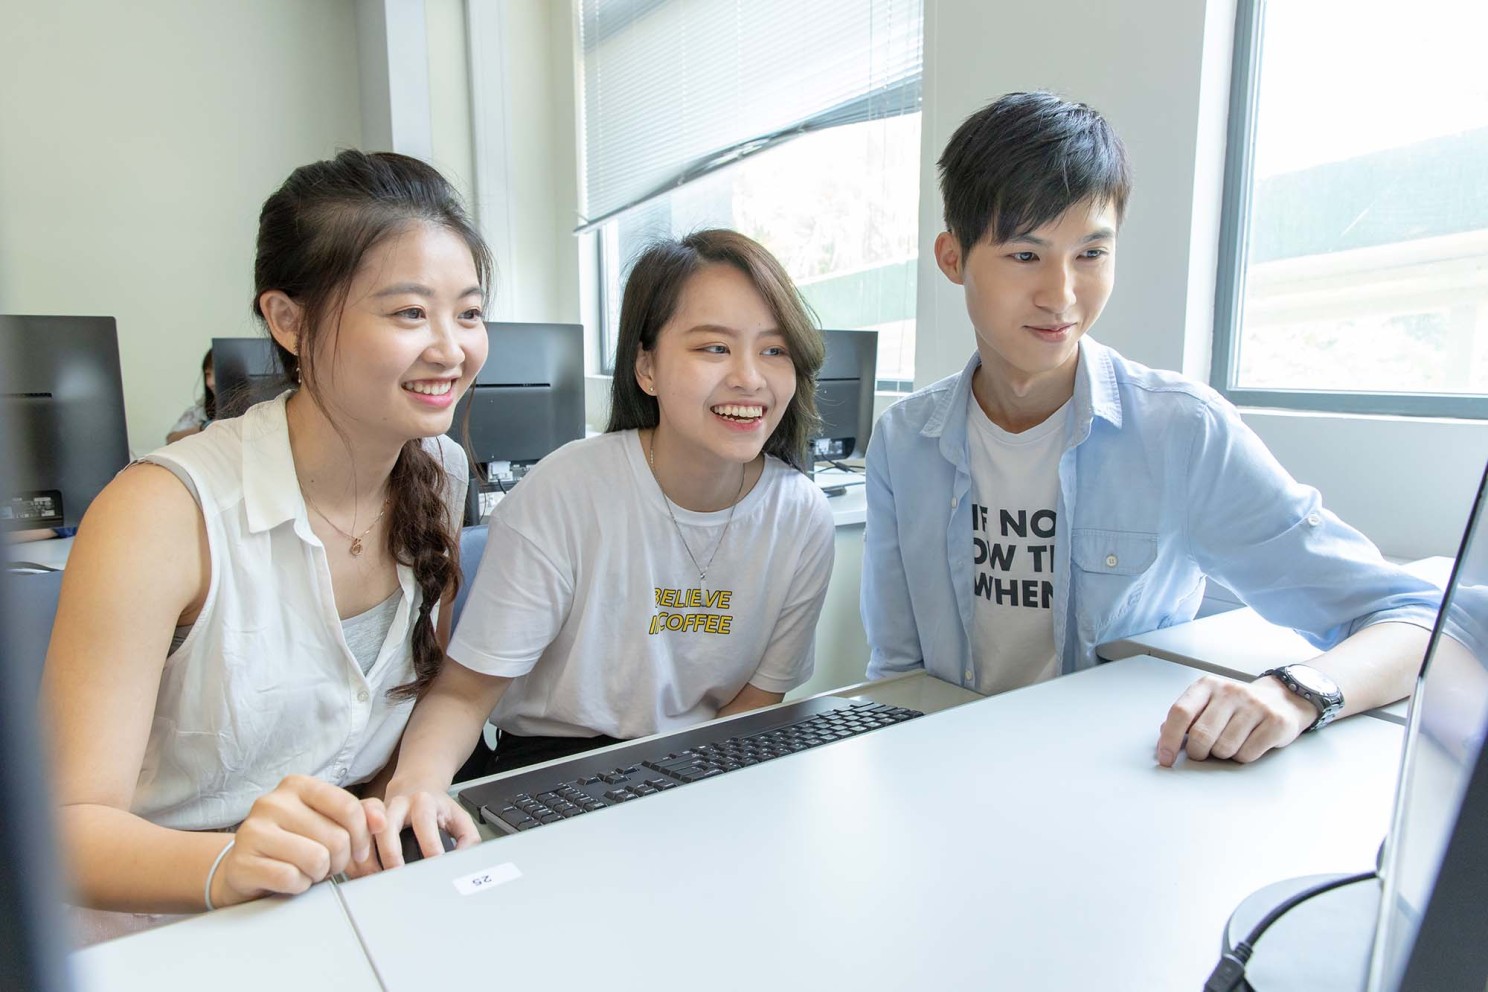 E-learning is challenging, but LU overcomes with concerted efforts